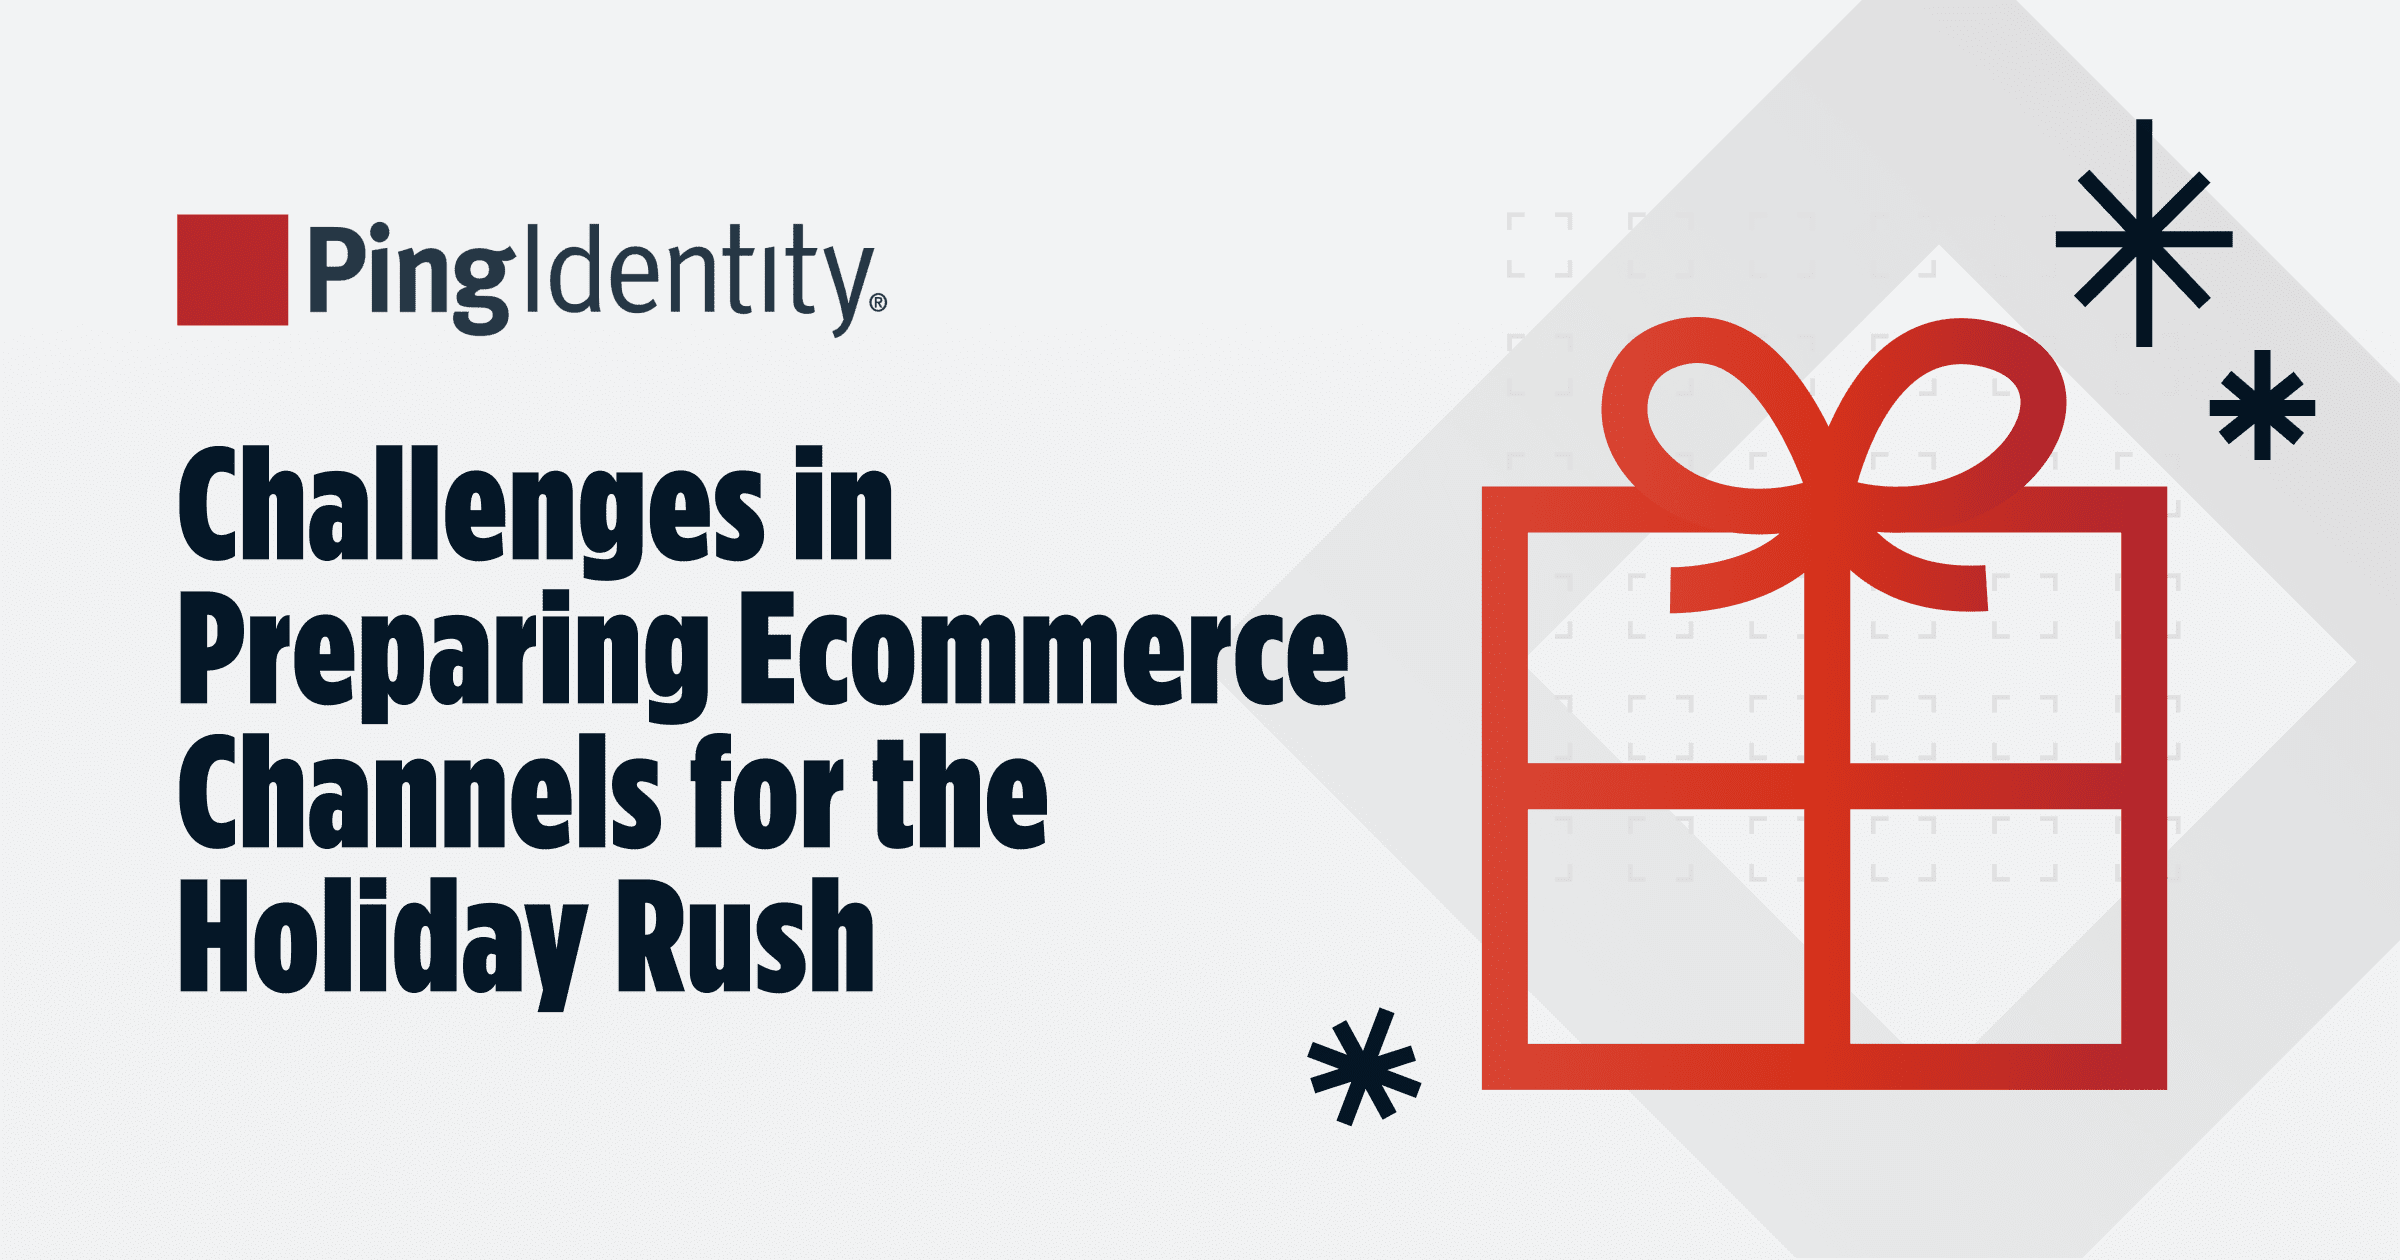 A blog's open graph image titled 'Challenges in Preparing Ecommerce Channels for the Holiday Rush' bearing a gift icon and Ping Identity's logo.